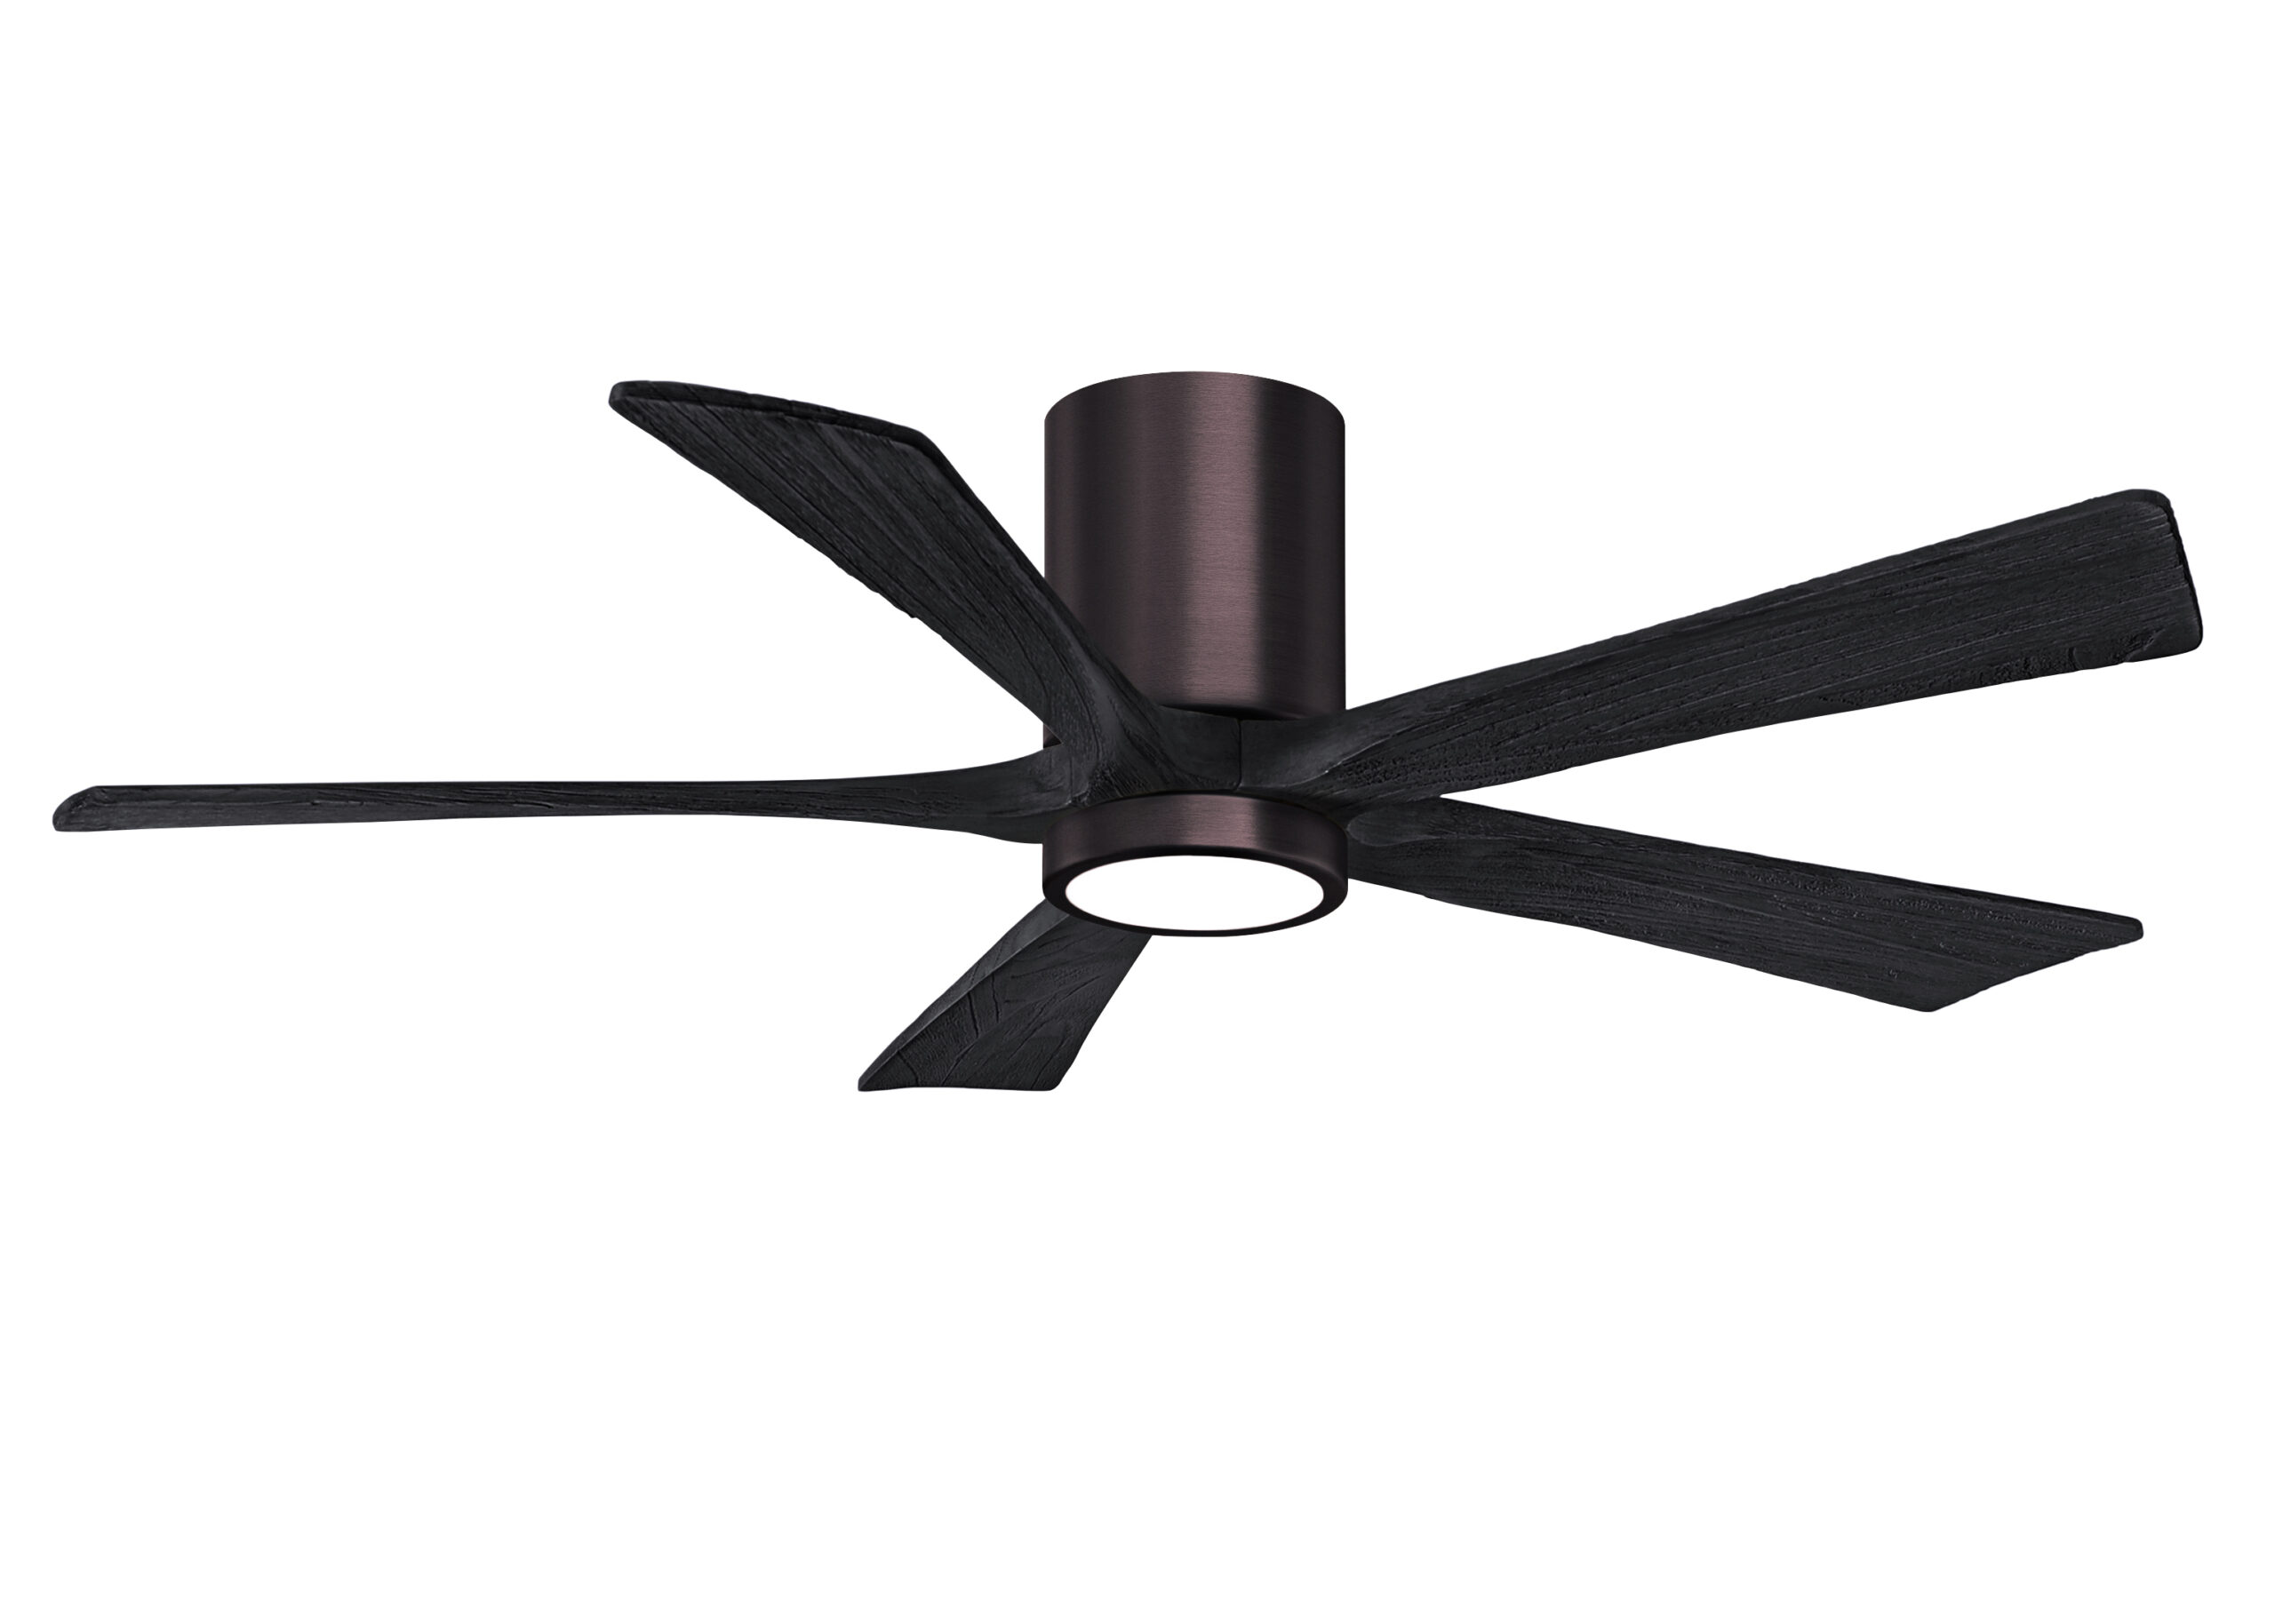 Irene-5HLK Ceiling Fan in Brushed Bronze Finish with 52